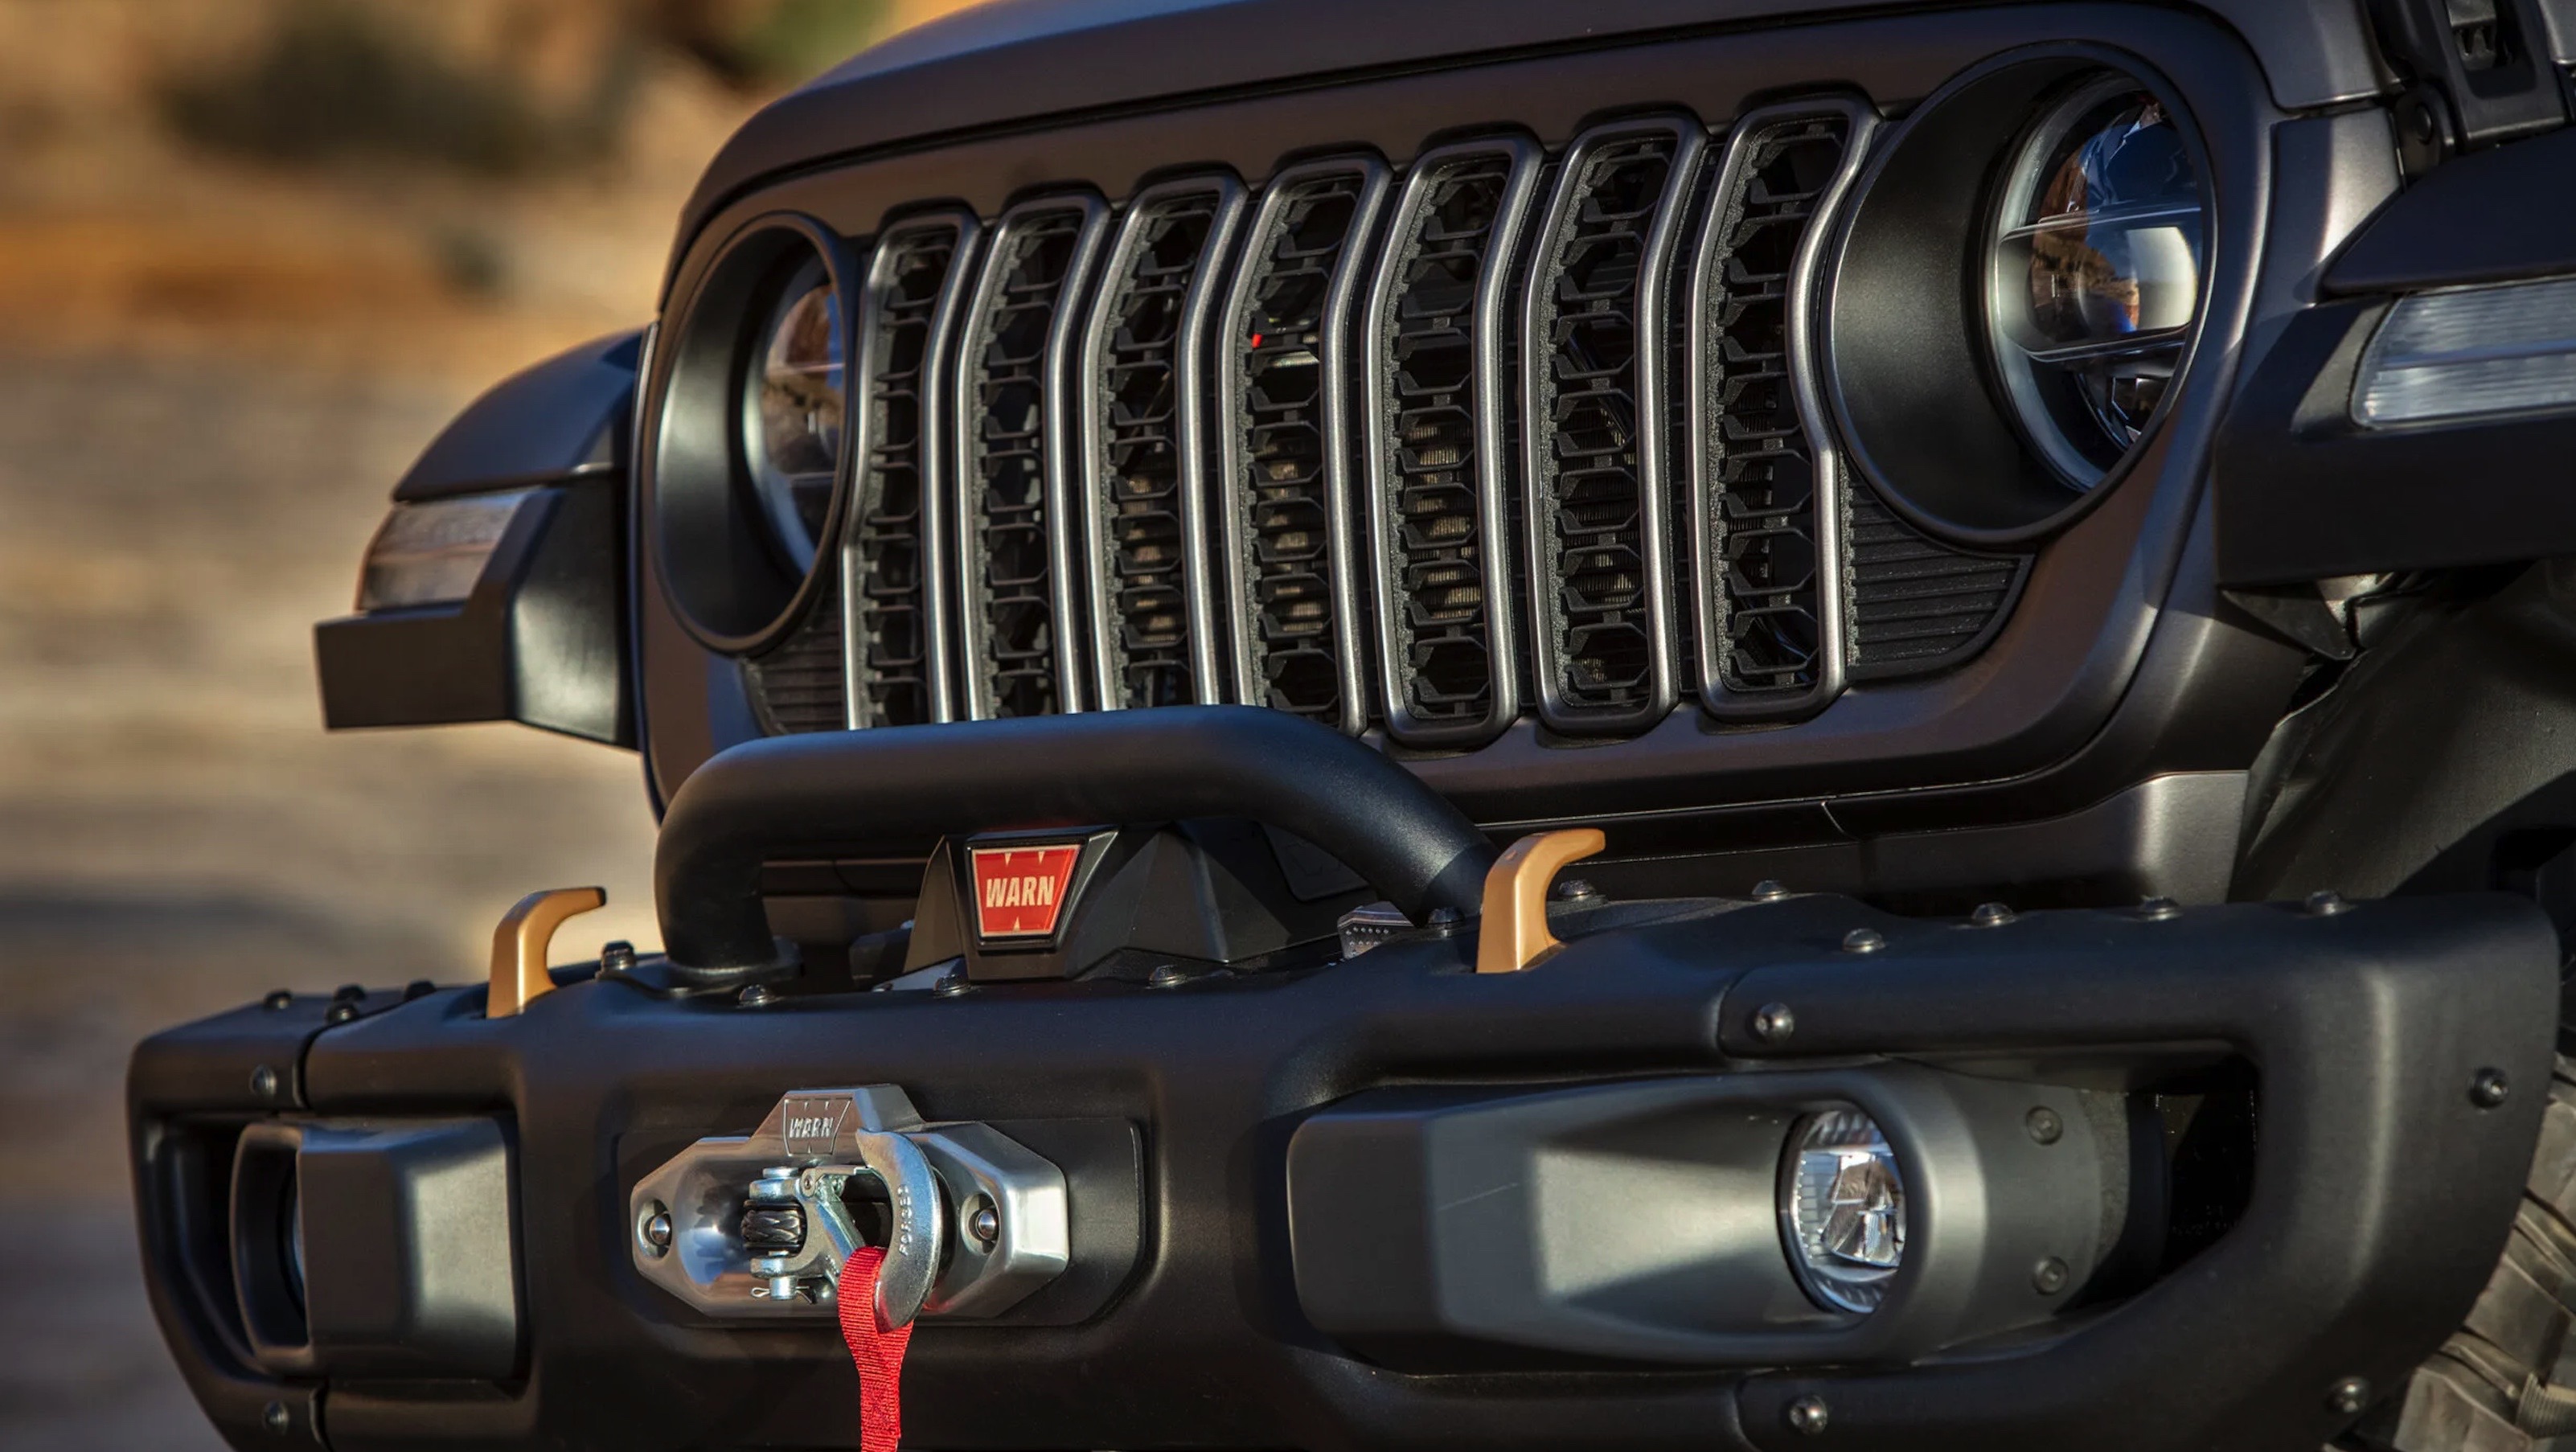 RUMOR! SPY PHOTOS! Is THIS The FACE Of the 2023 Jeep Wrangler